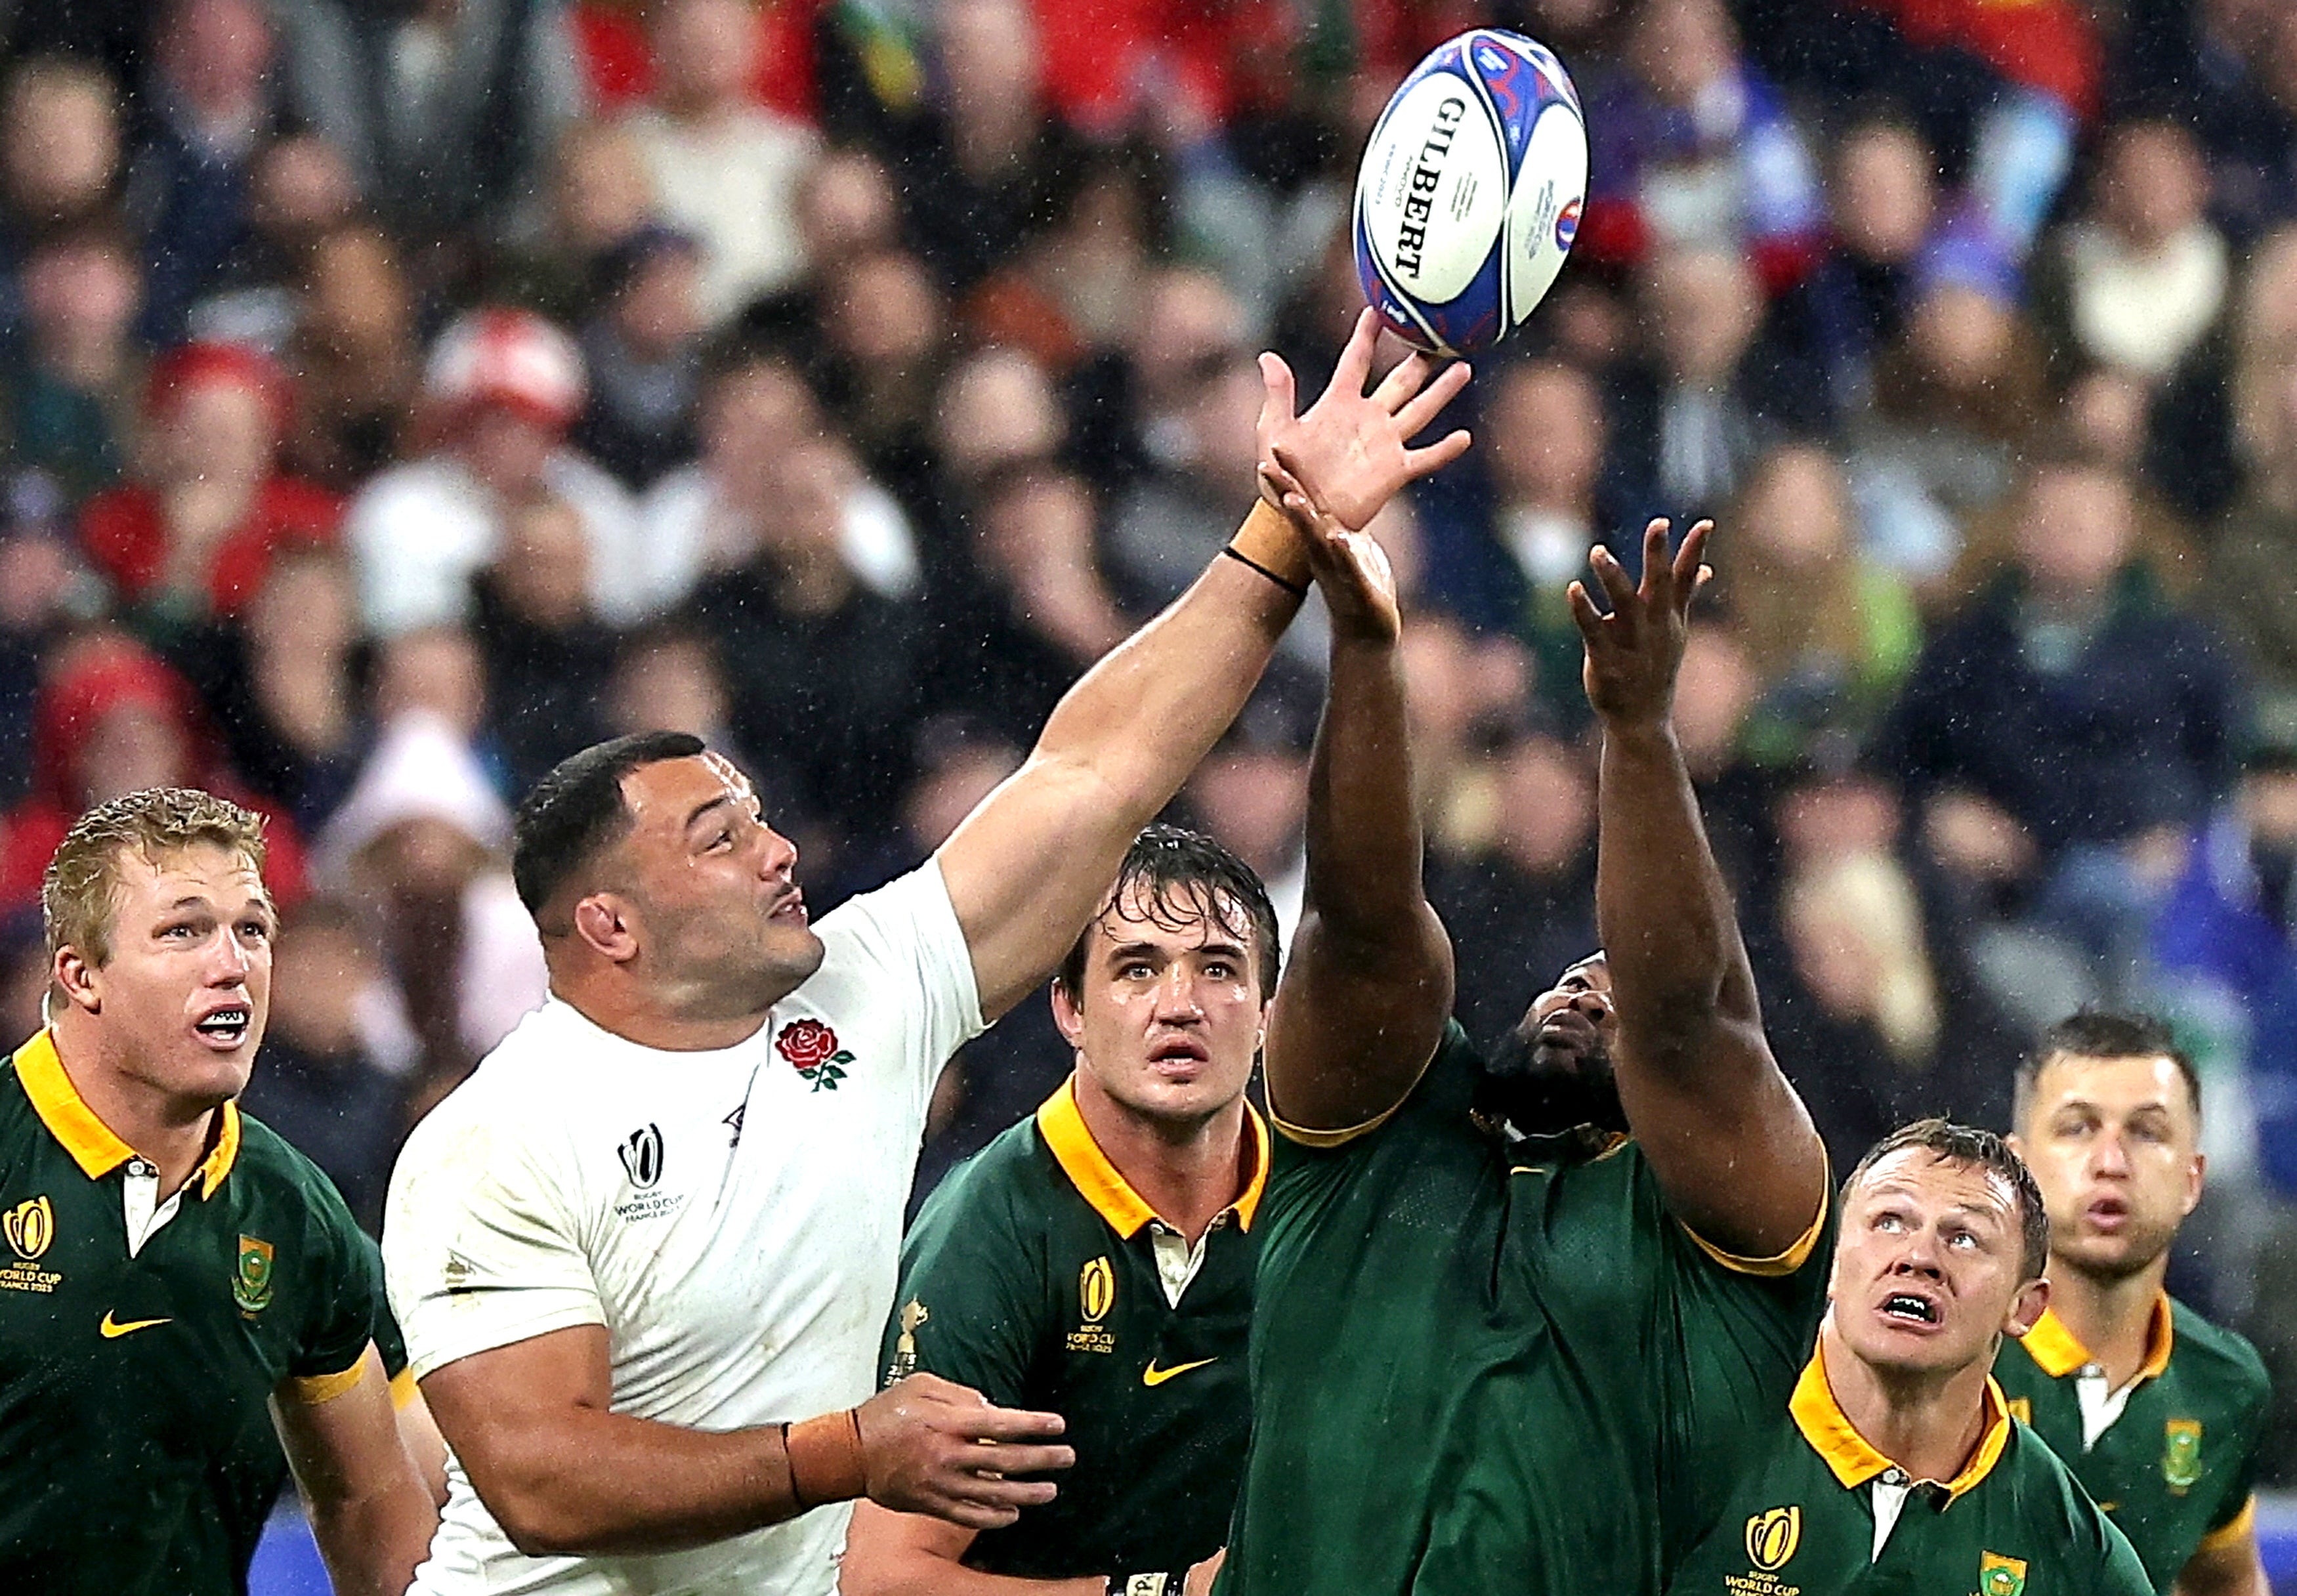 Ox Nche was immense from the bench against the Springboks